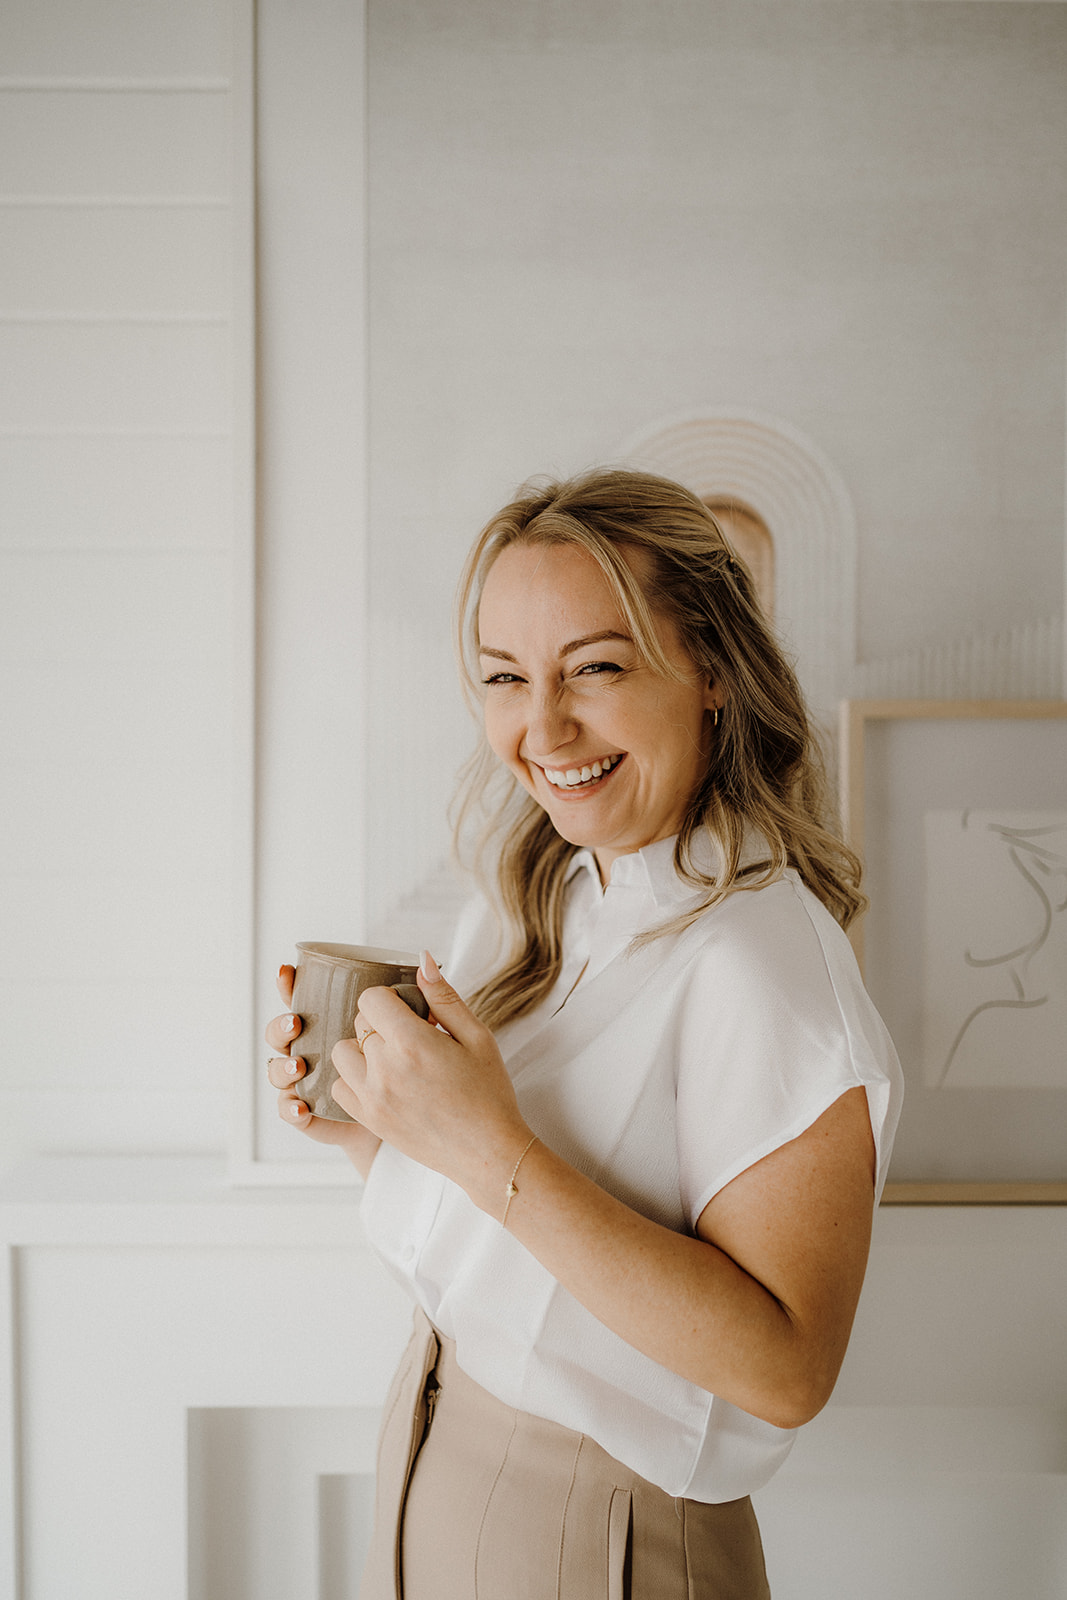 Lady smiling while holding a mug in her hands.